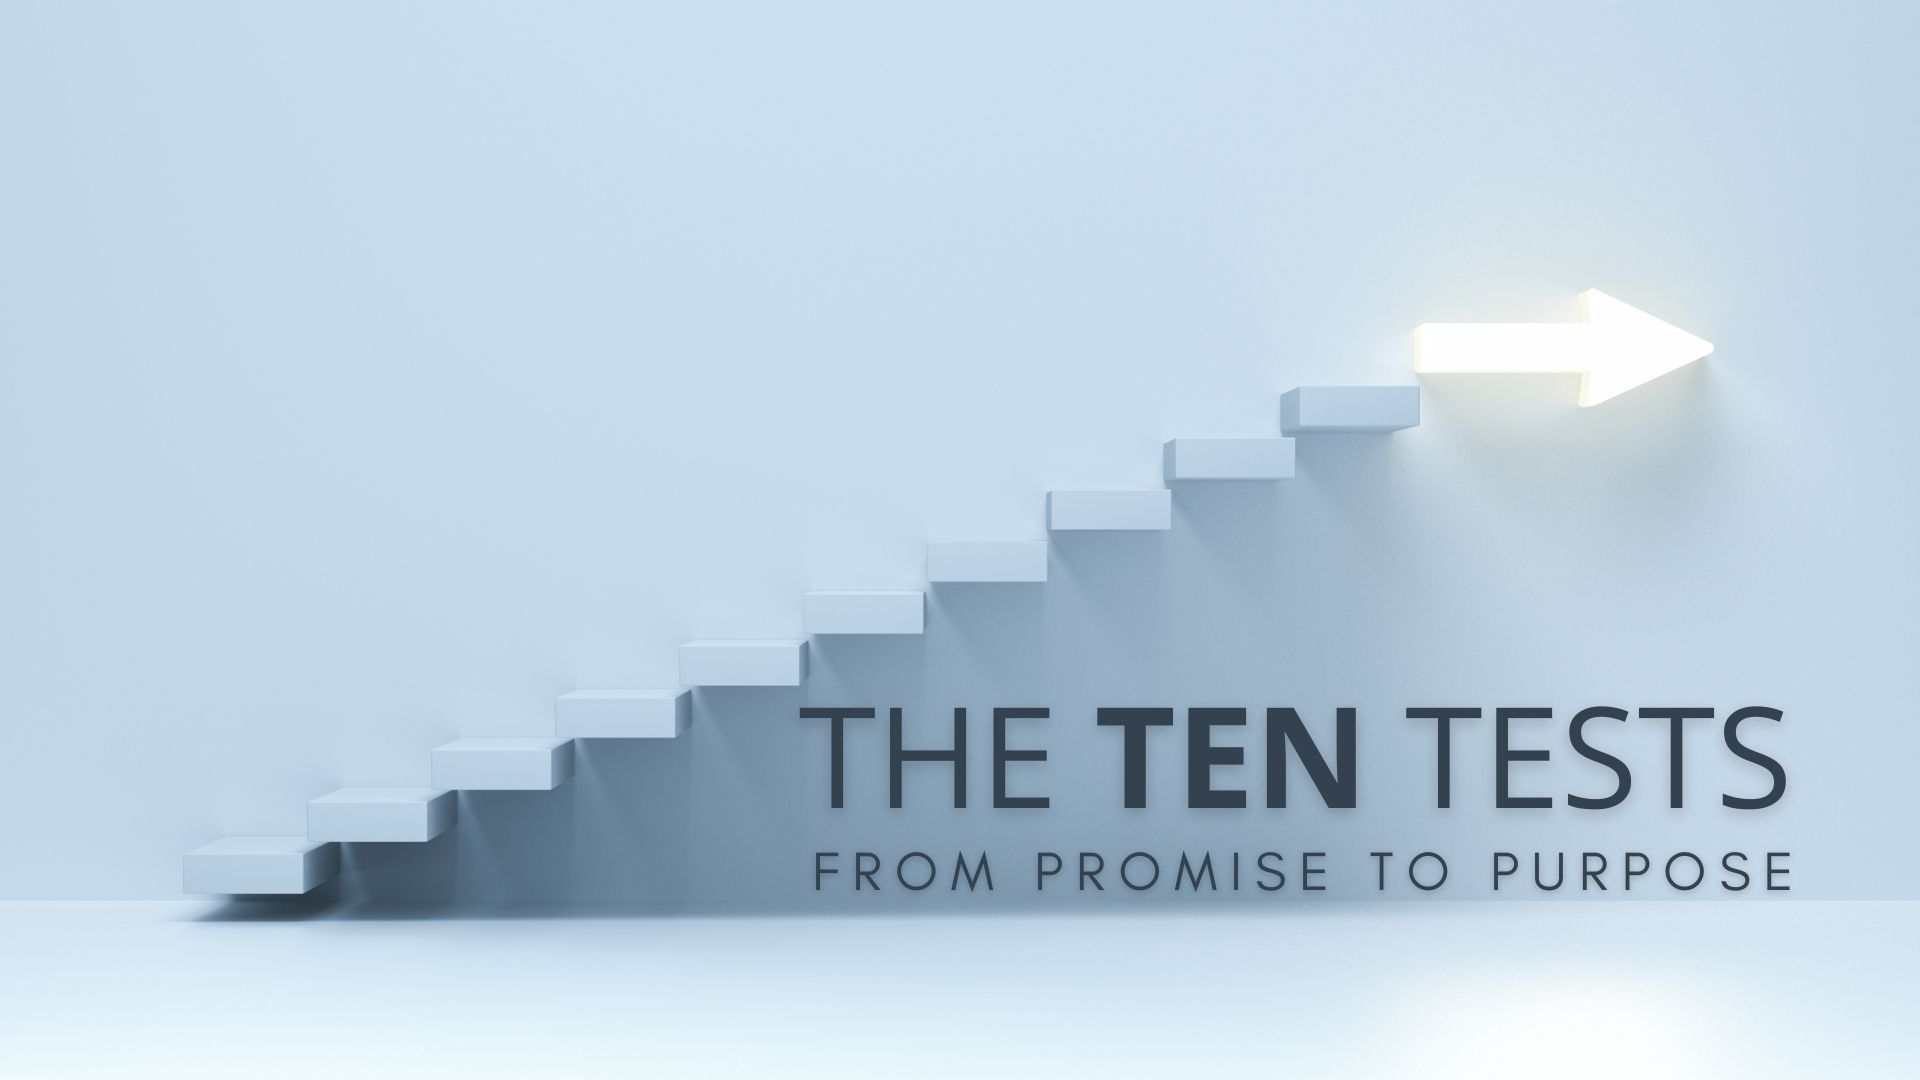 The TEN Tests: From Promise to Purpose - The Purity Test